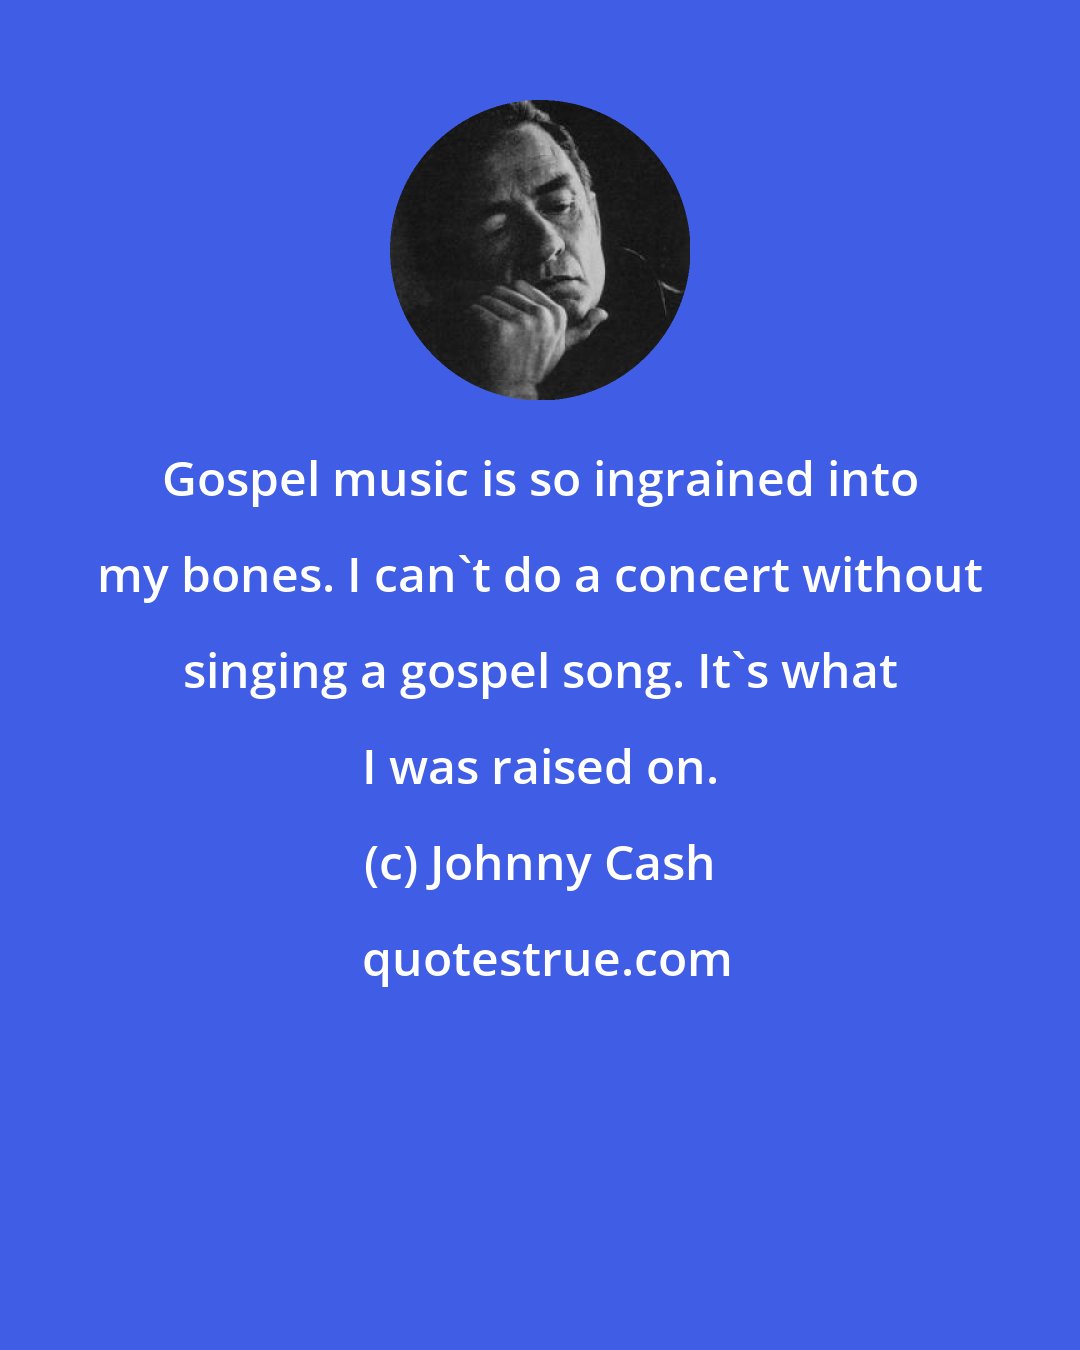 Johnny Cash: Gospel music is so ingrained into my bones. I can't do a concert without singing a gospel song. It's what I was raised on.